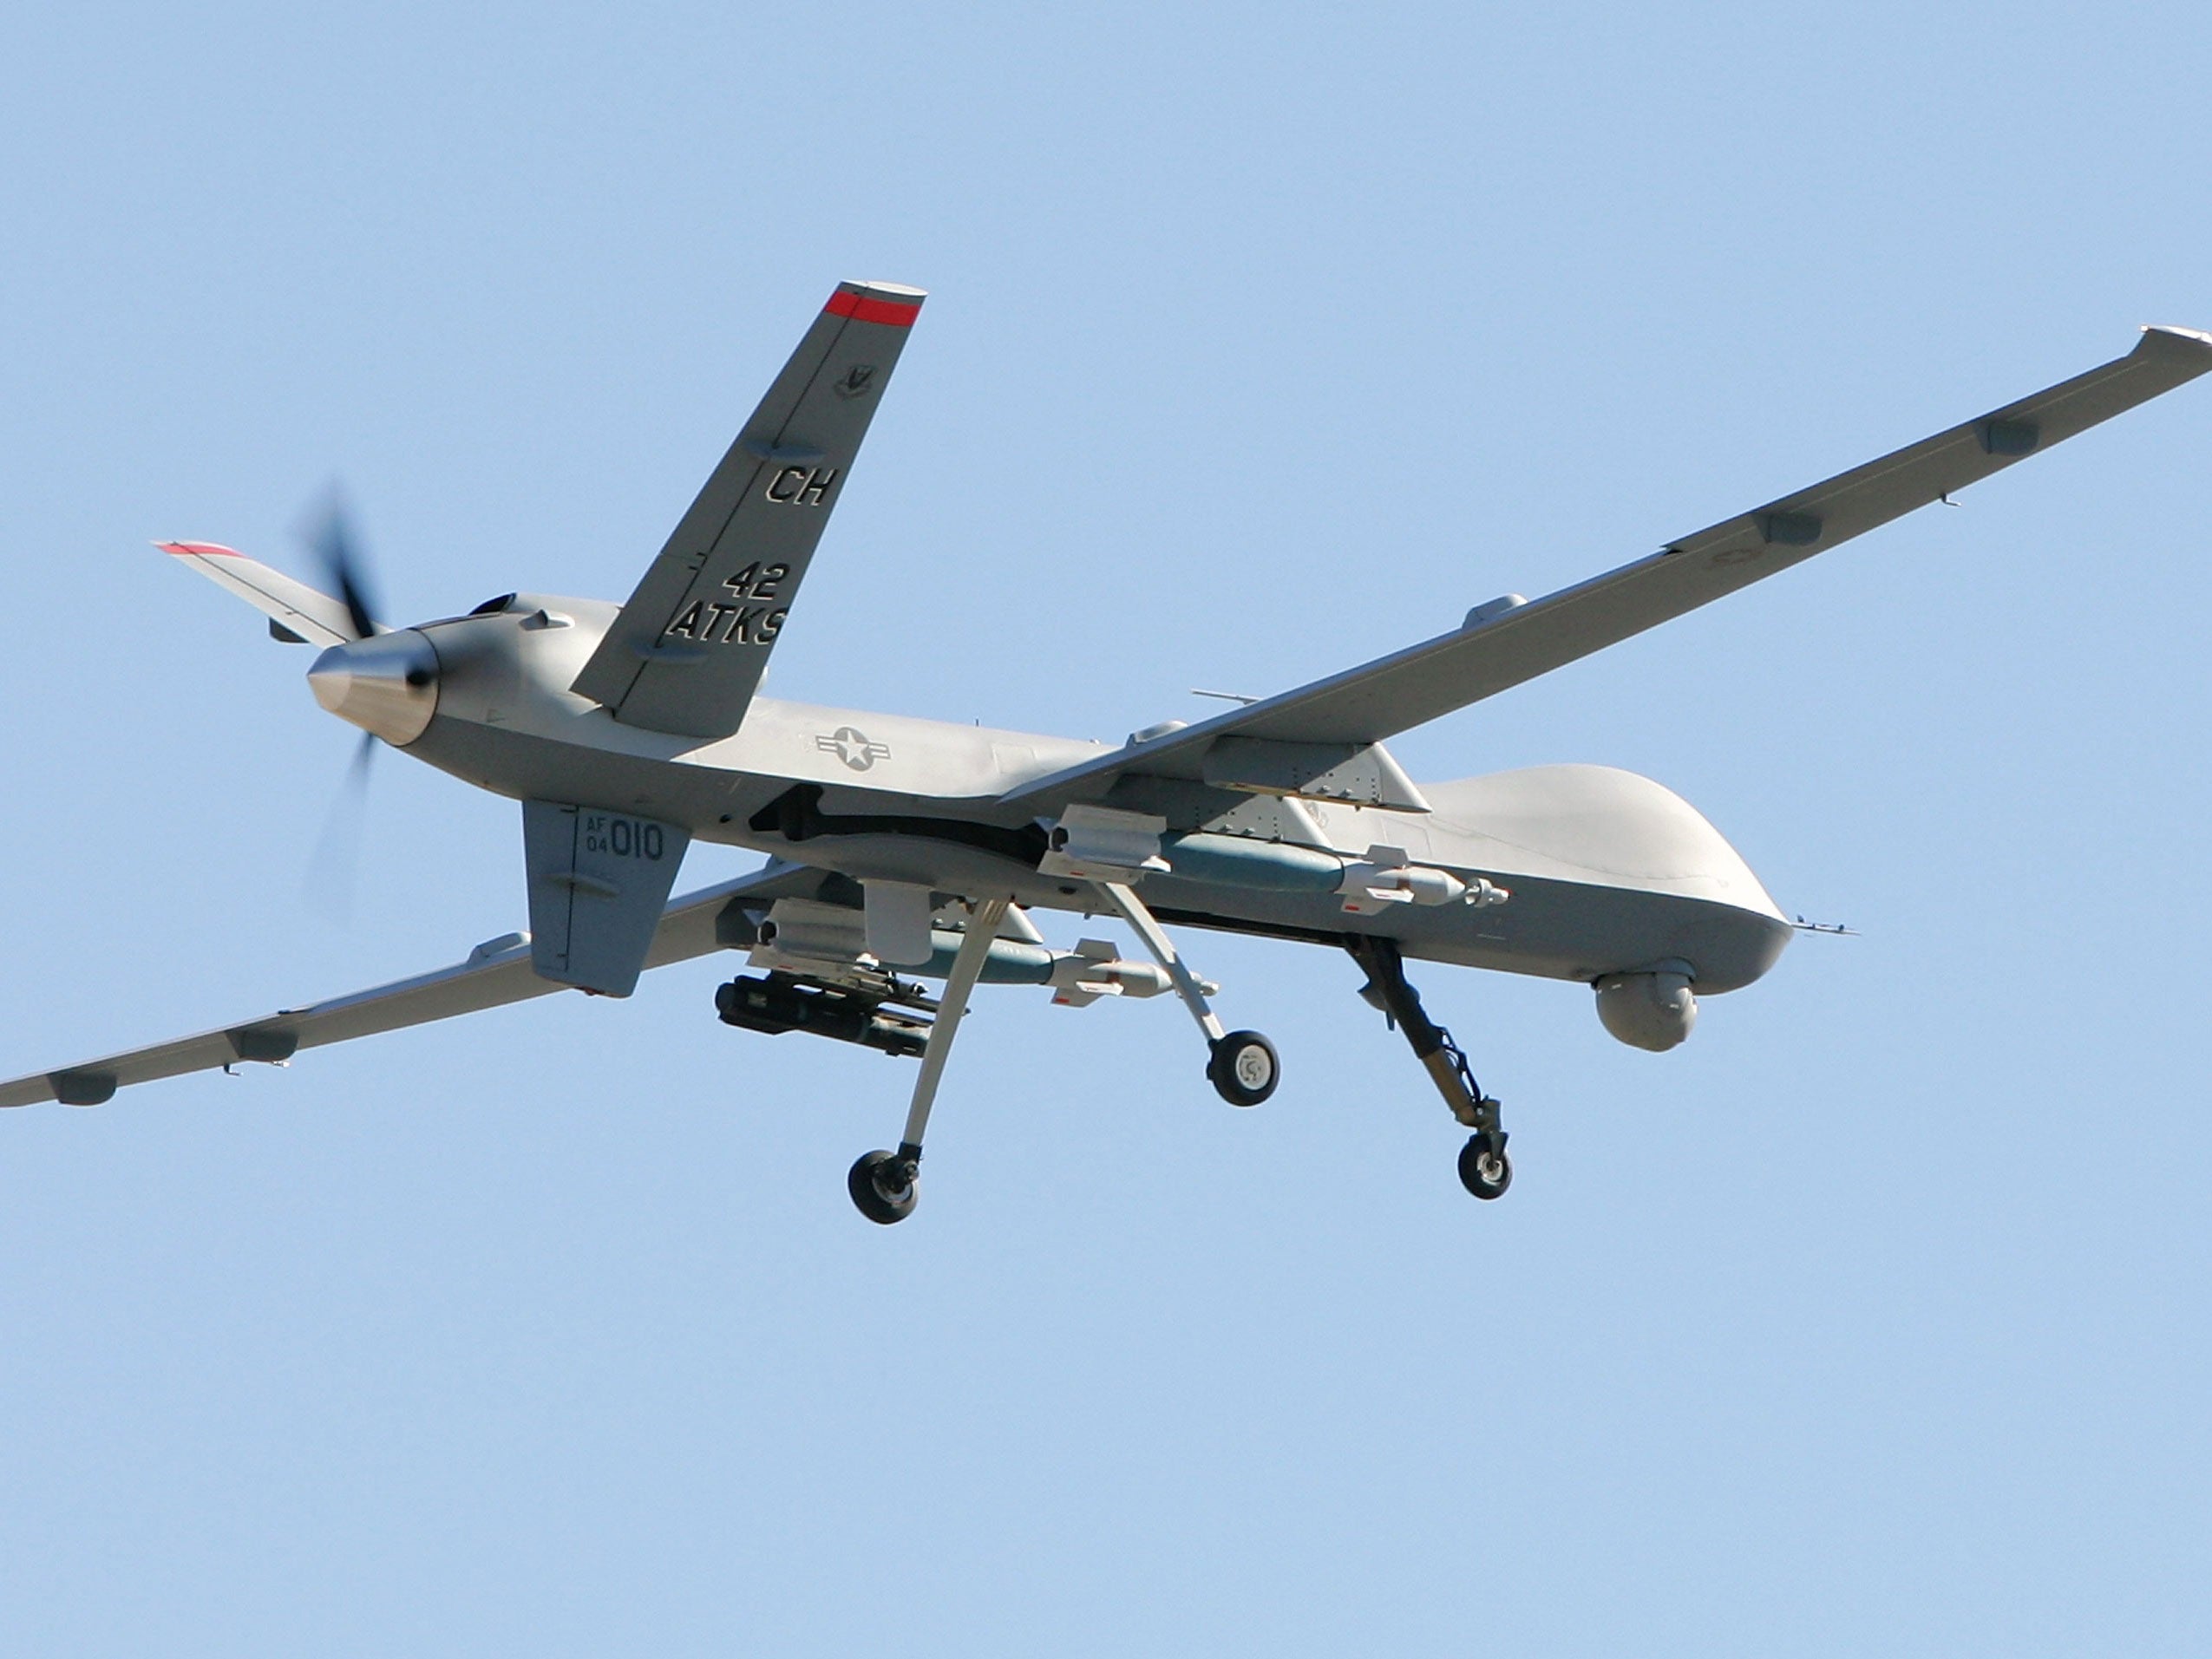 Former US government analyst faces 50 years in prison for allegedly leaking classified drone warfare documents